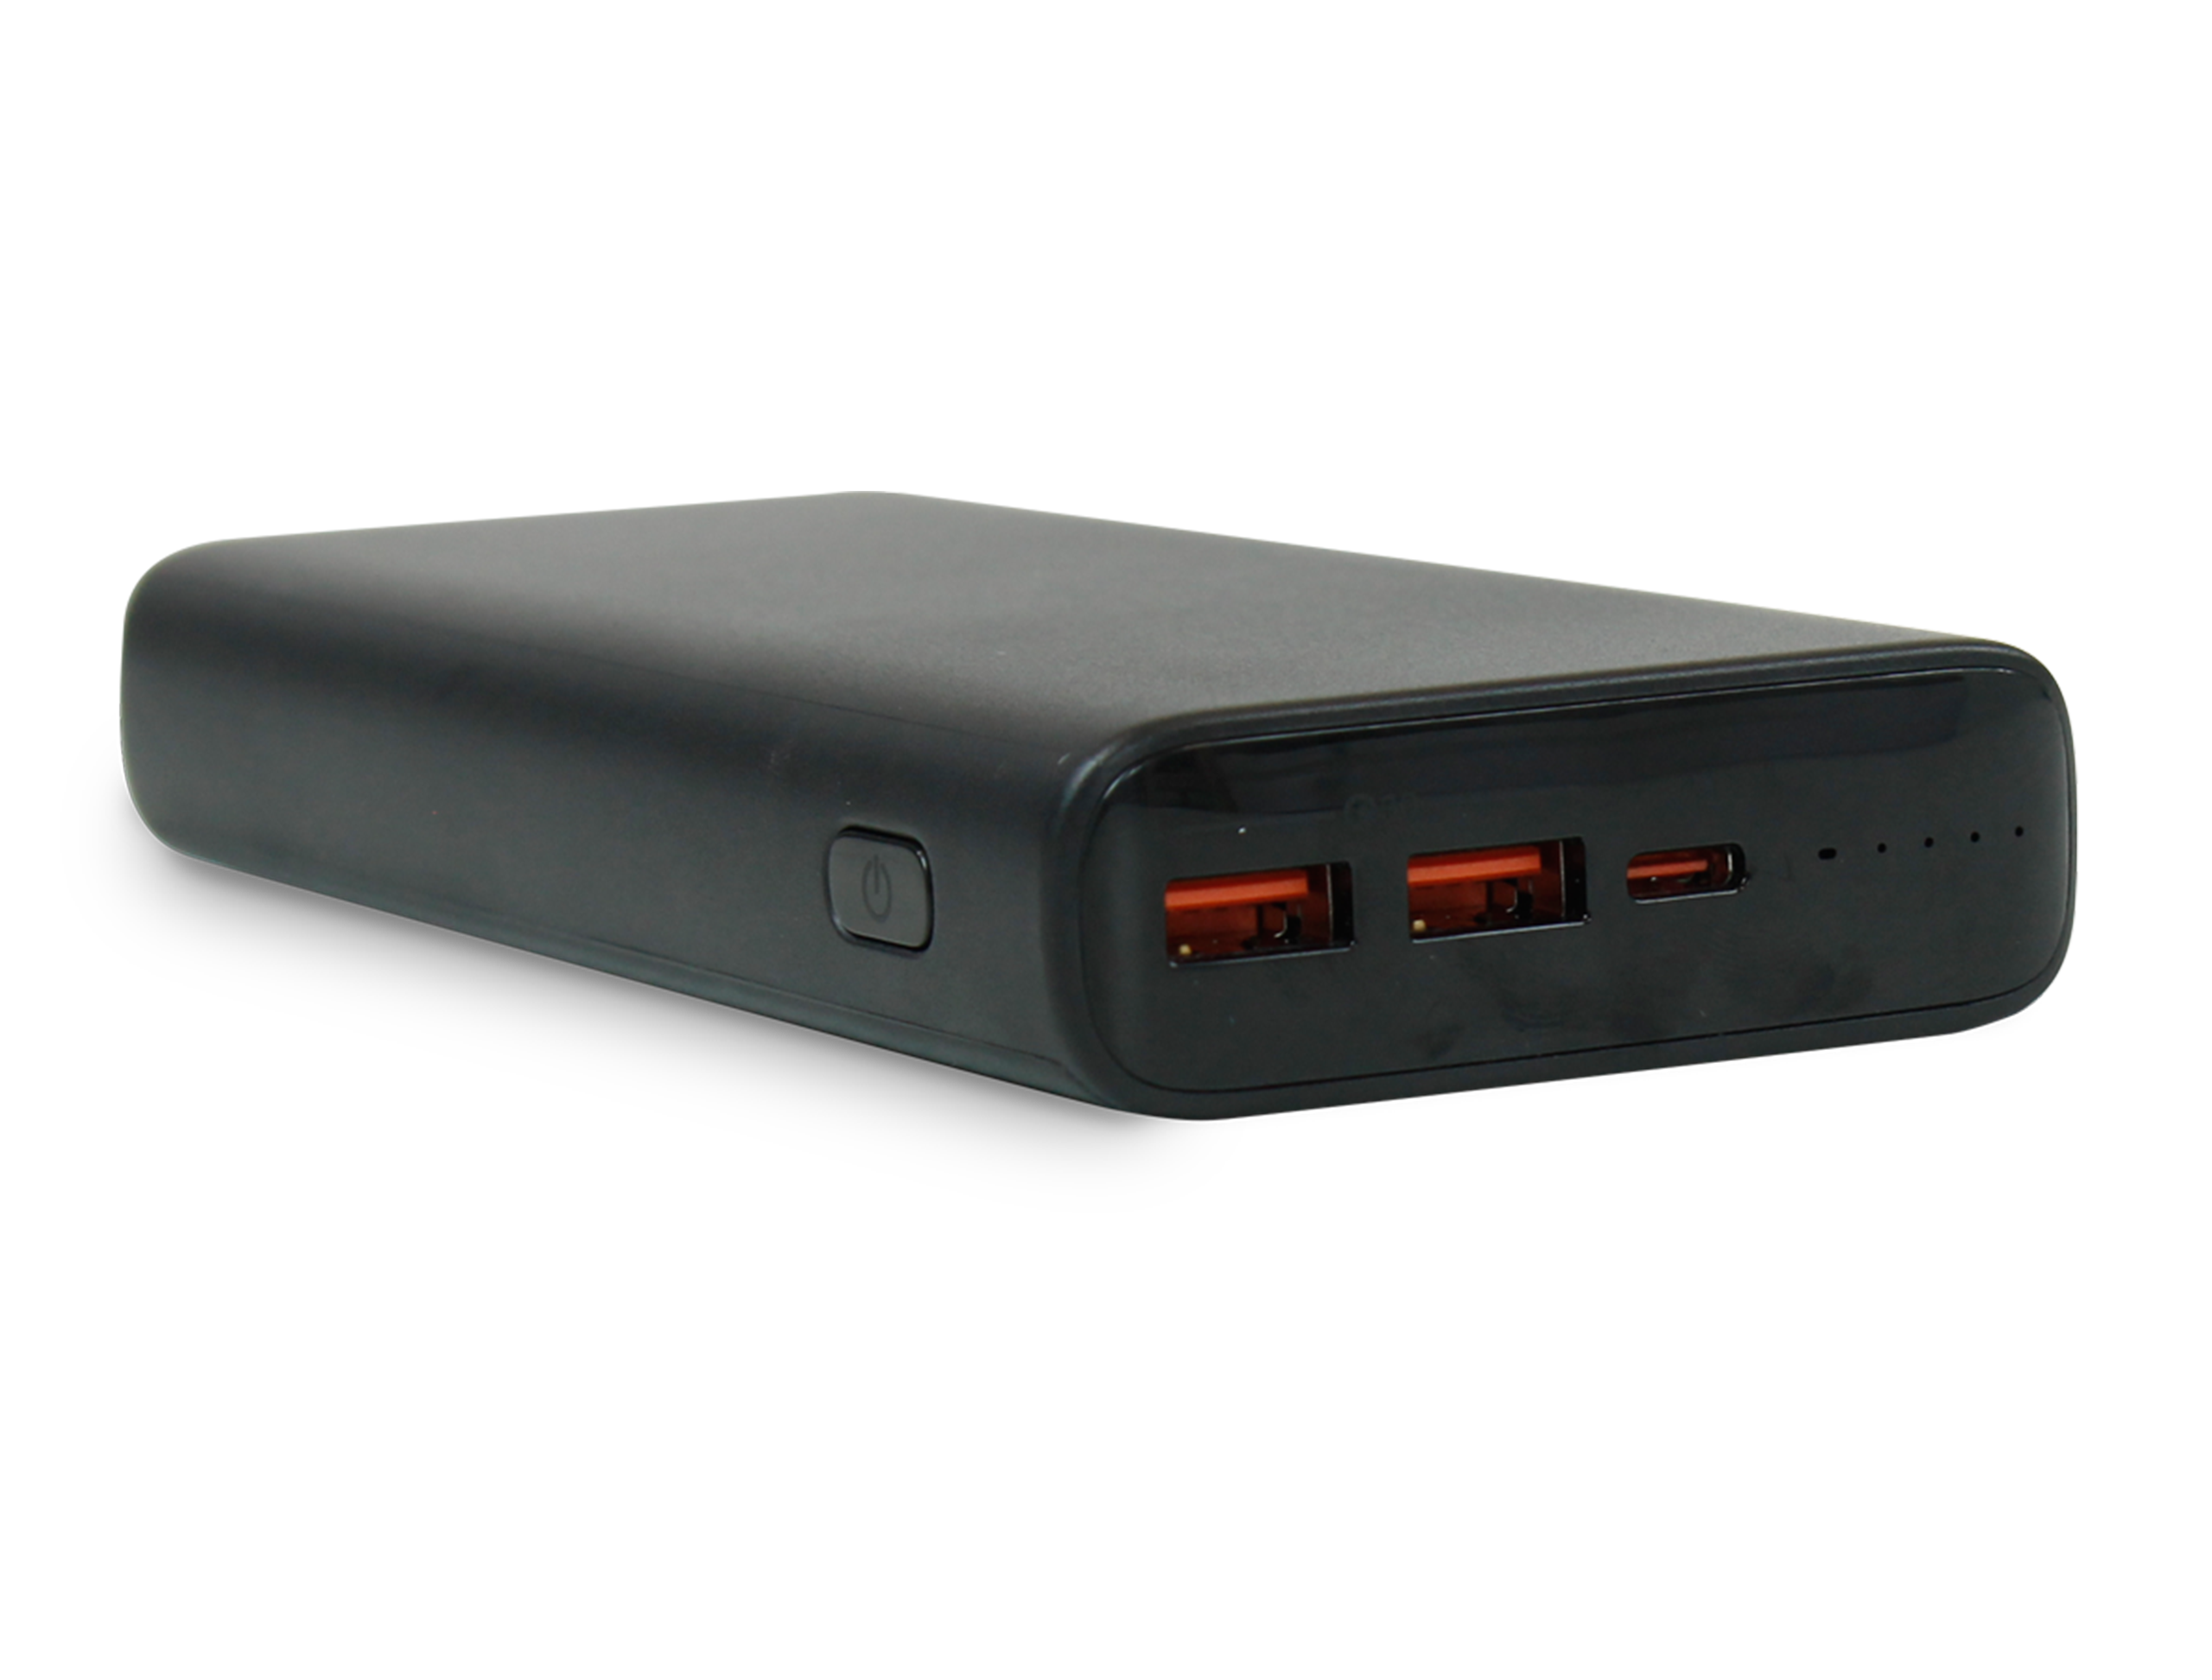 Active Charge Power Bank with 65W USB-C Output